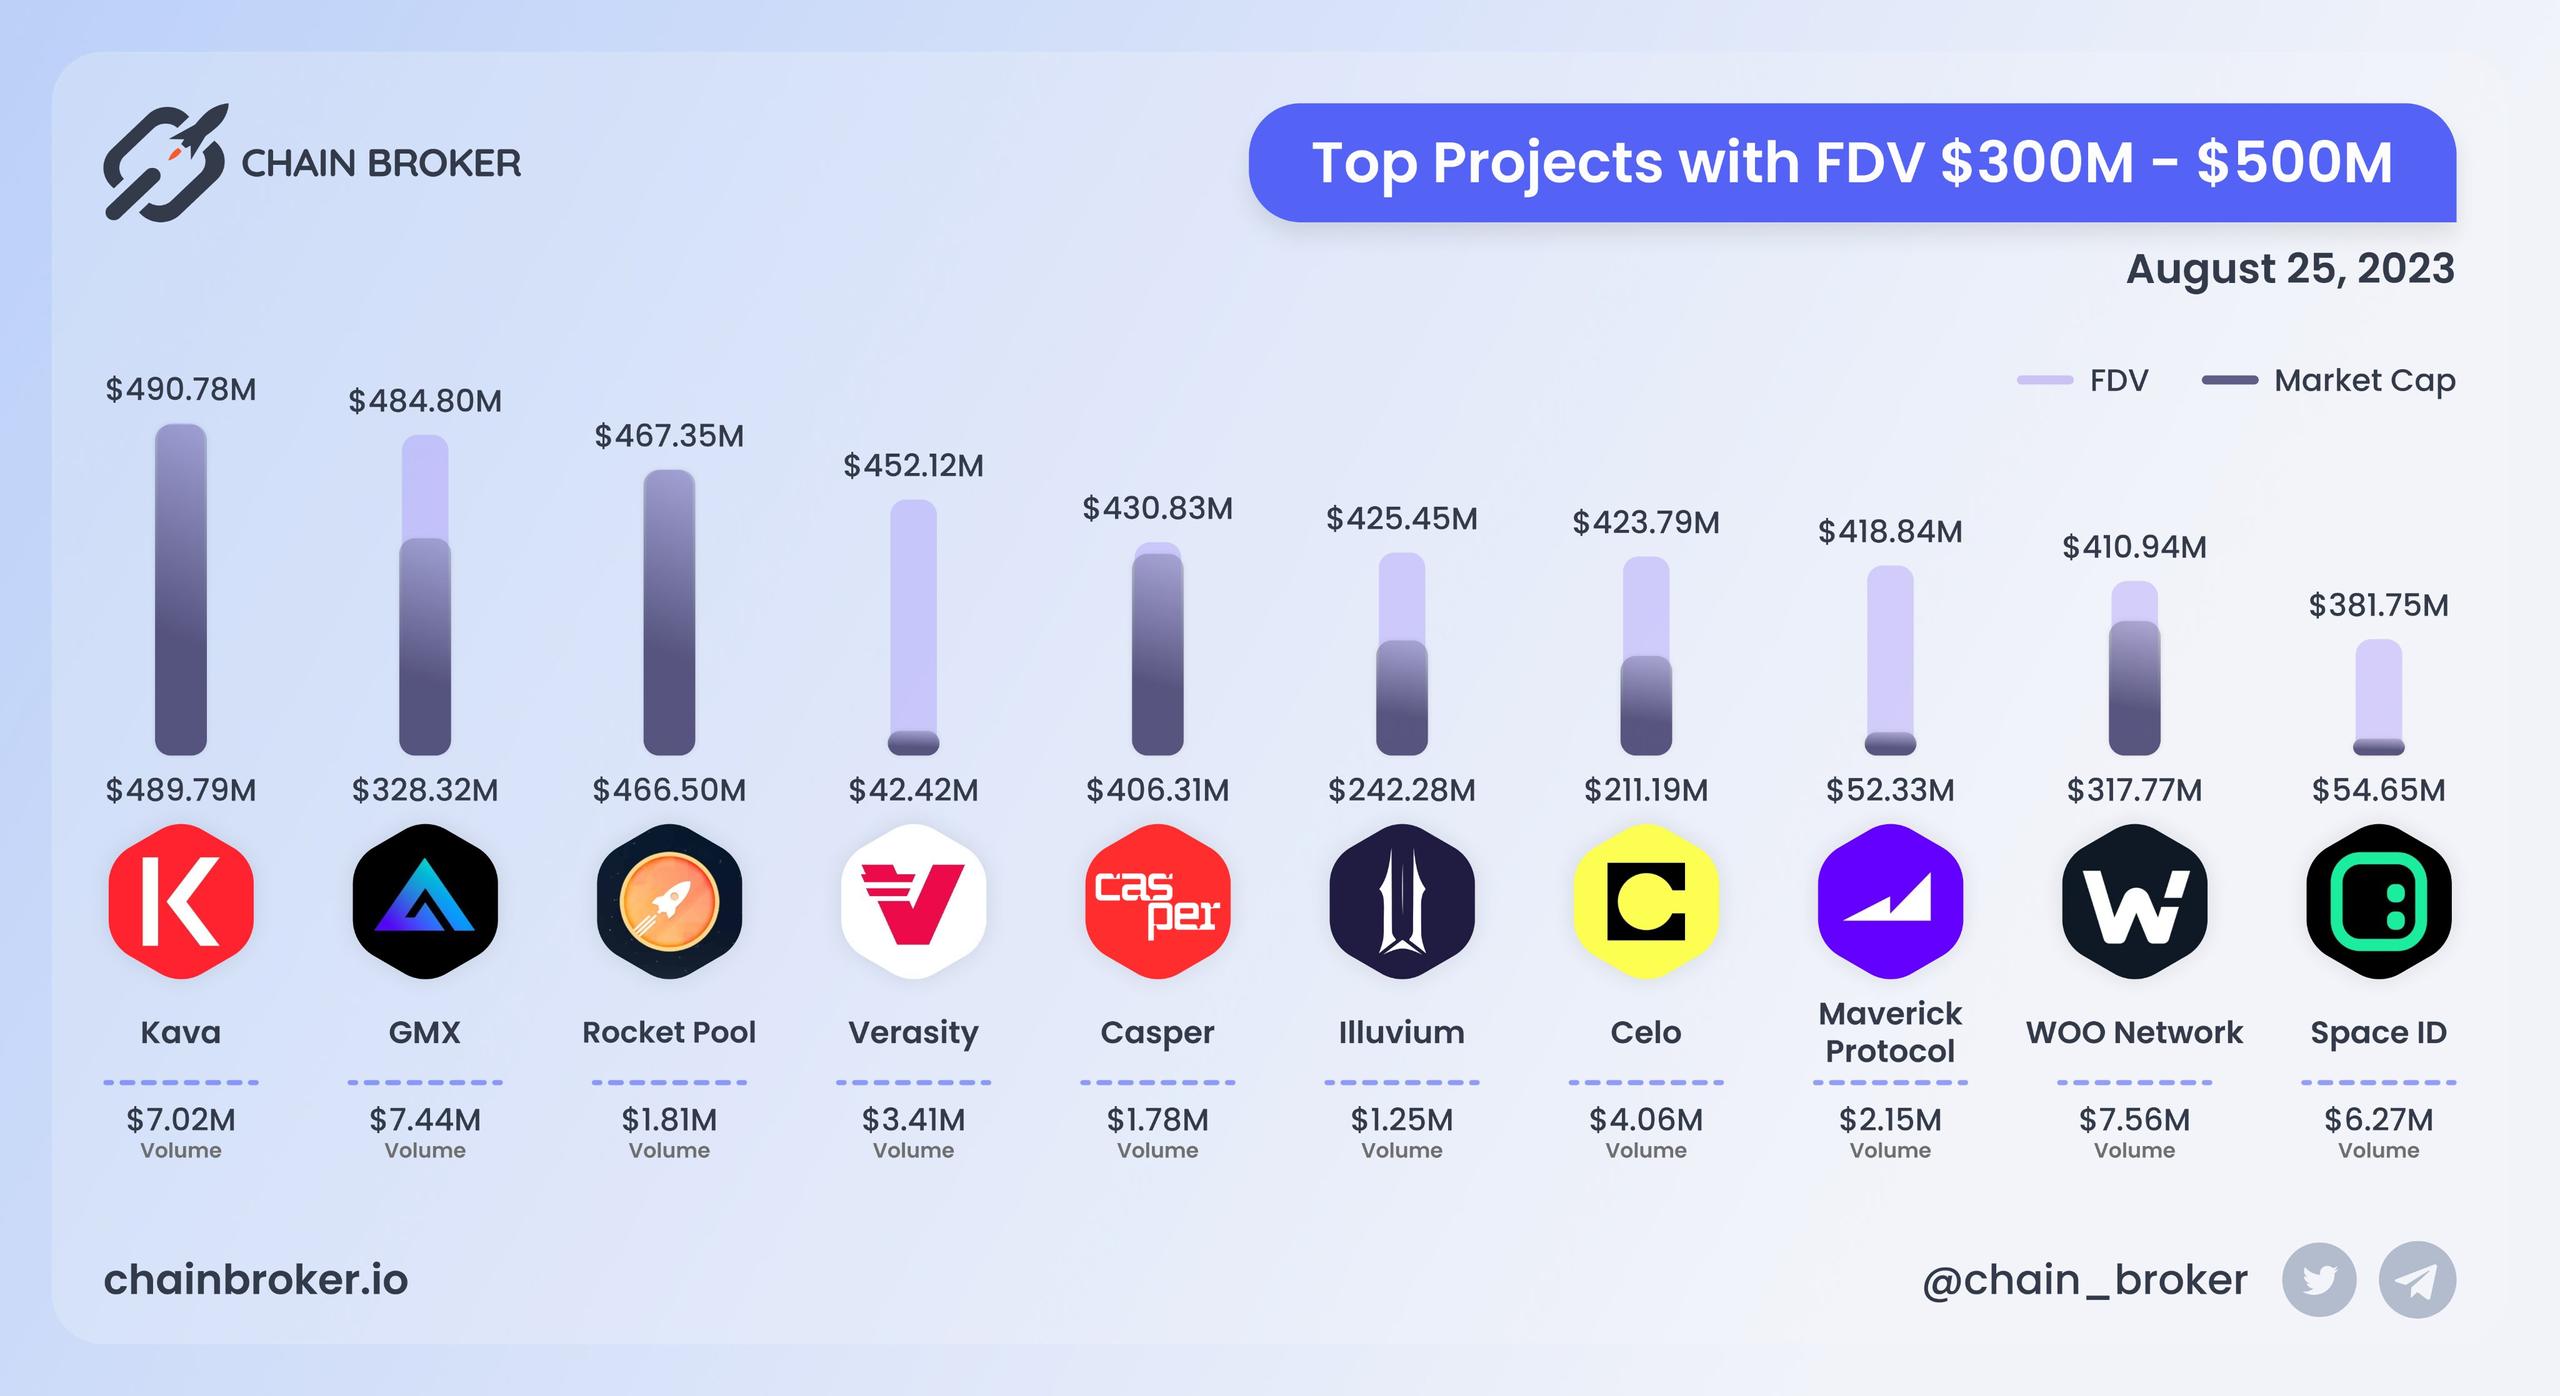 Top projects with FDV $300M - $500M